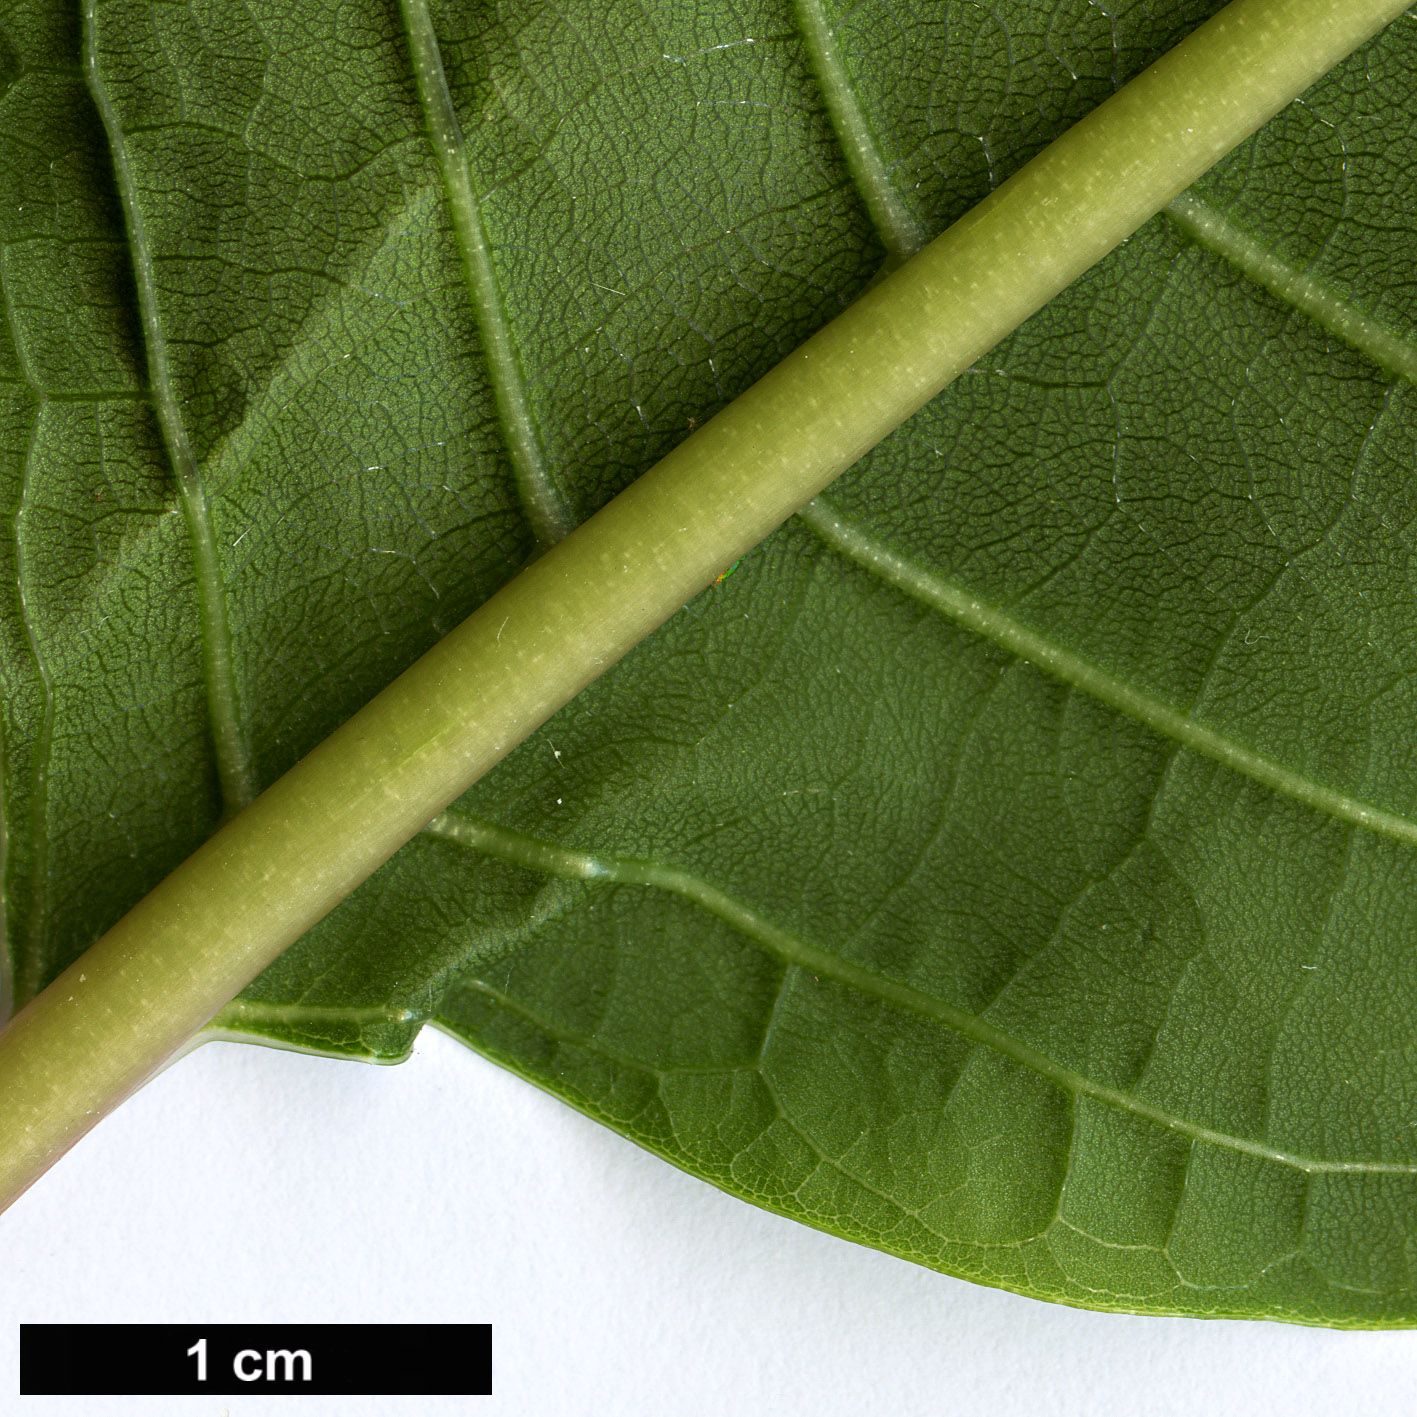 High resolution image: Family: Solanaceae - Genus: Phytolacca - Taxon: dioica